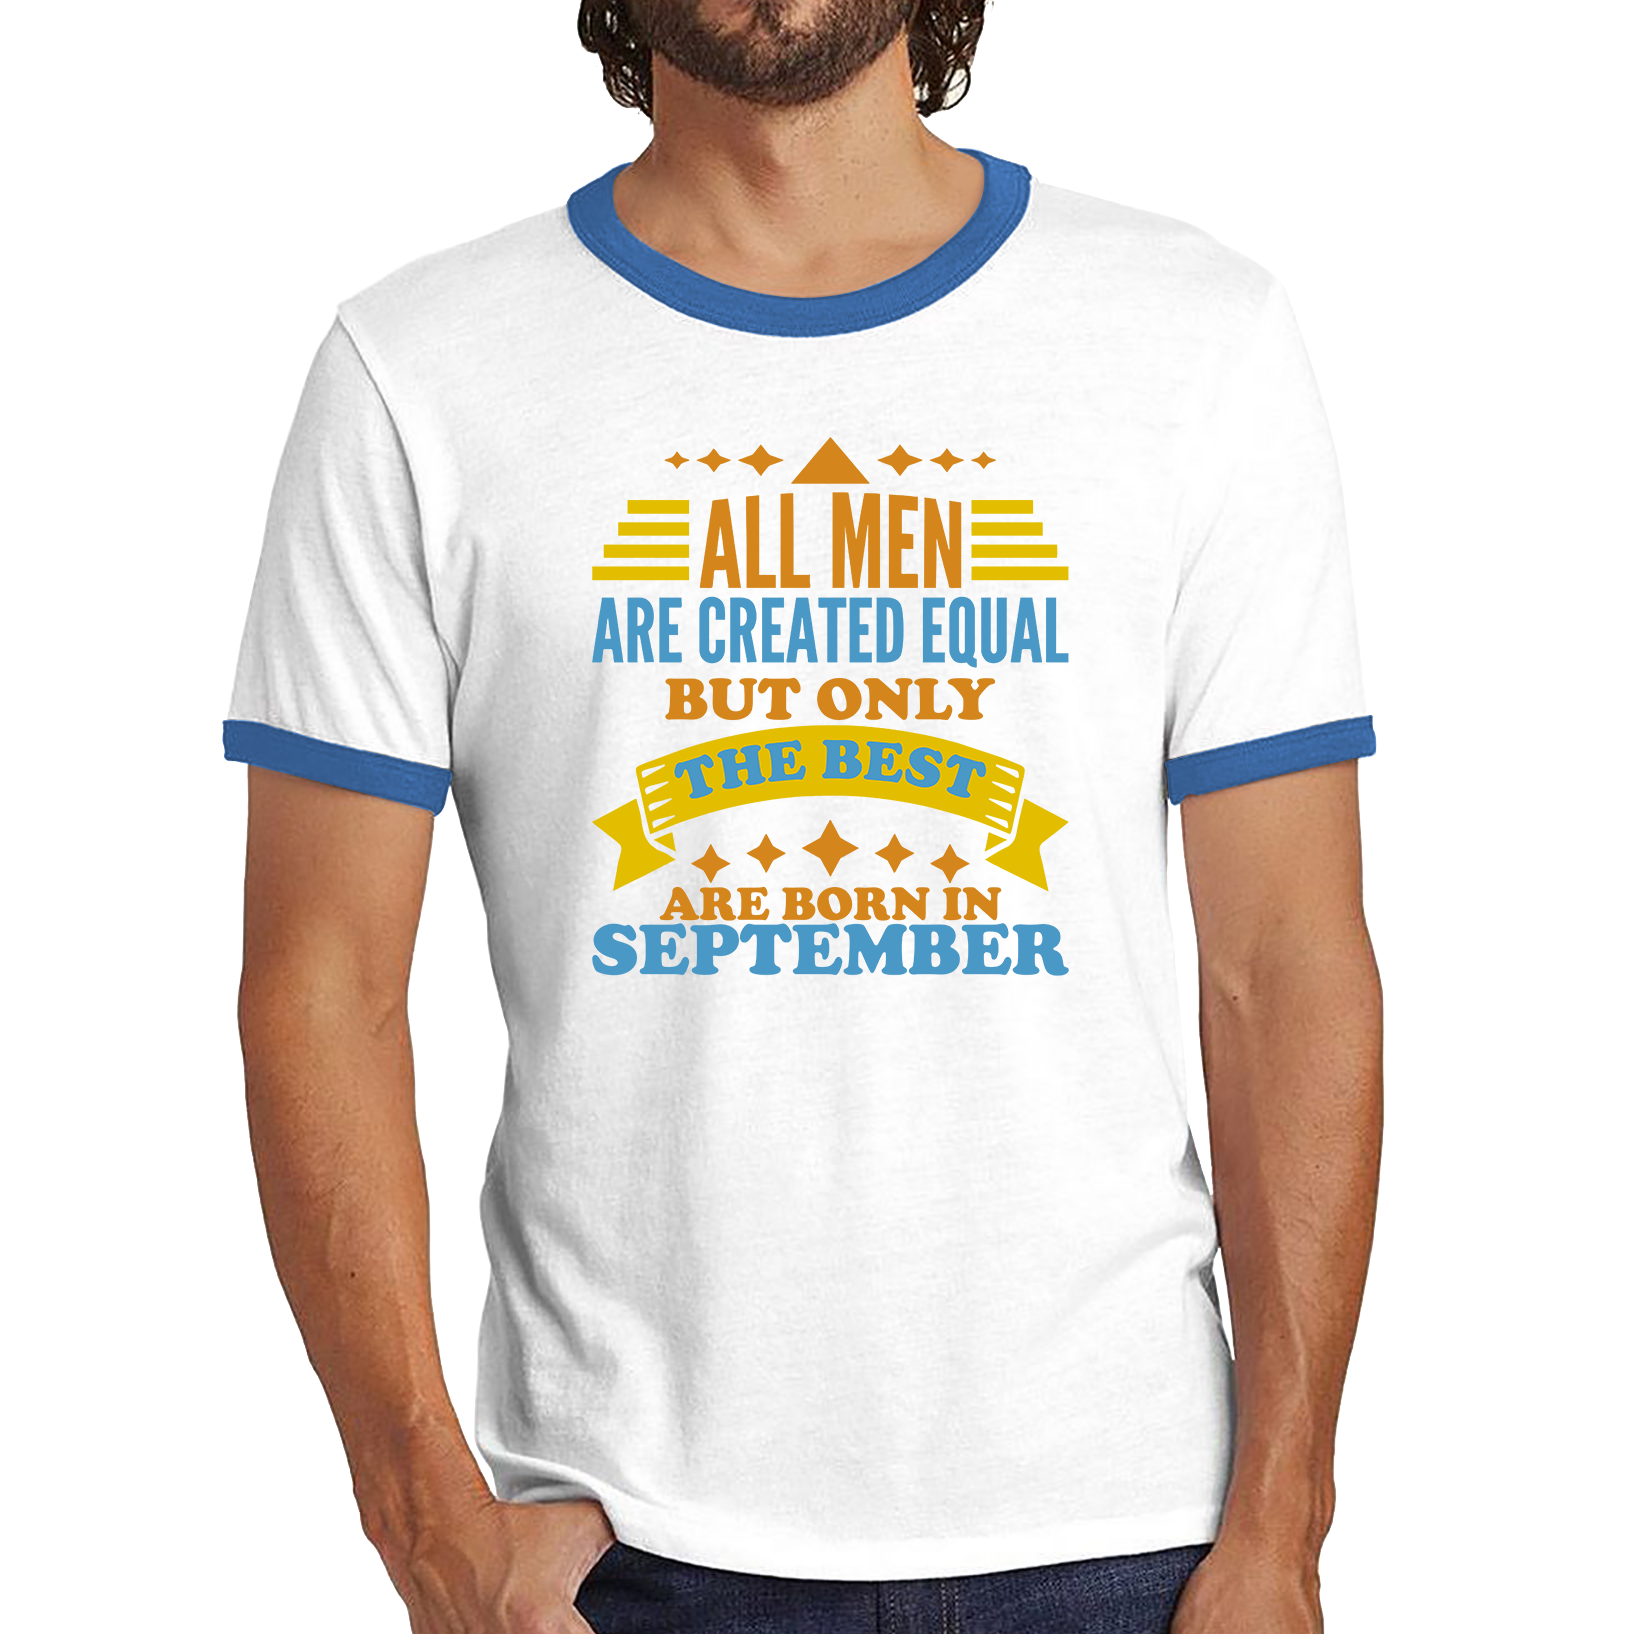 All Men Are Created Equal But Only The Best Are Born In September Funny Birthday Quote Ringer T Shirt